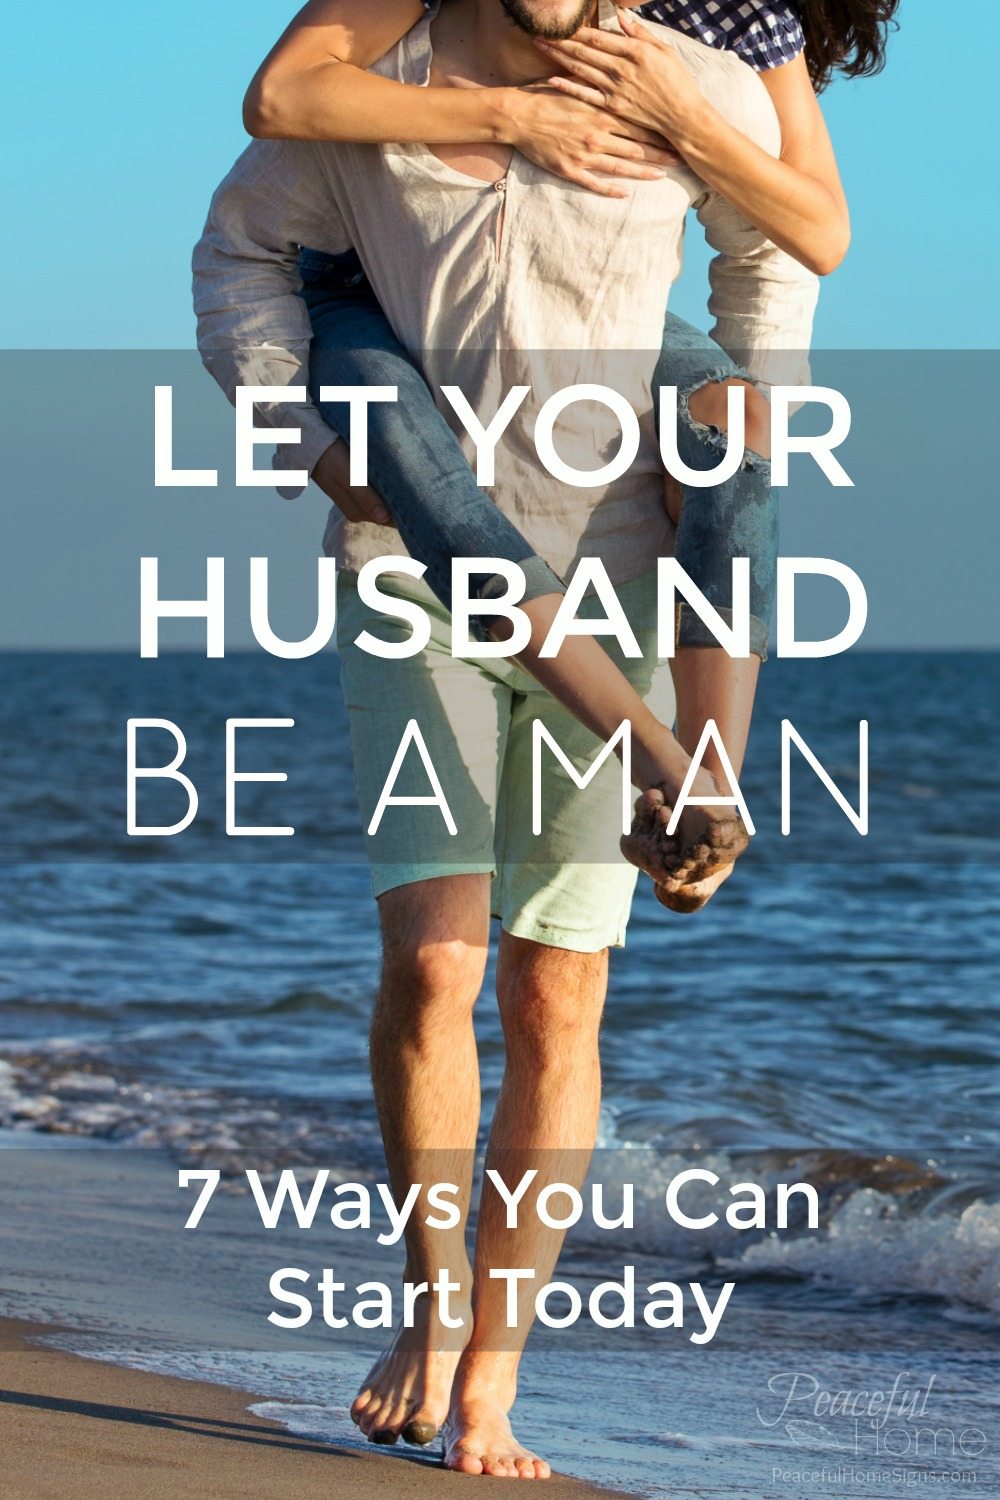 Let your husband be a man | Biblical Marriage | How to respect your husband | Honor your husband | Christ based marriage | Christian Marriage 